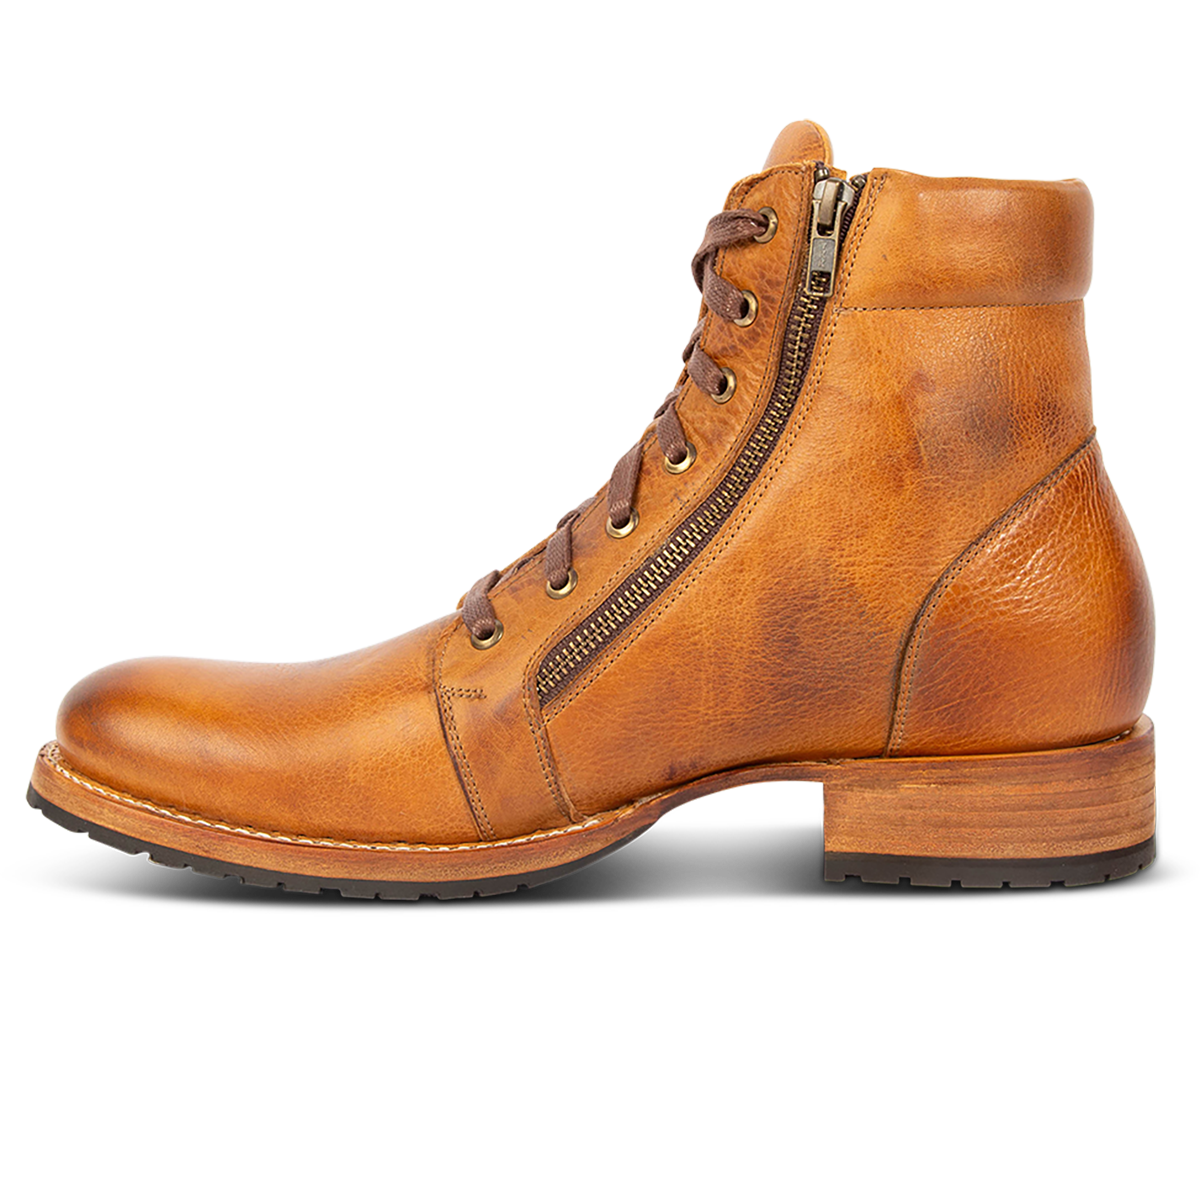 Side view showing brass zipper closure, low block heel and front lacing on FREEBIRD men's Chevy tan leather boot